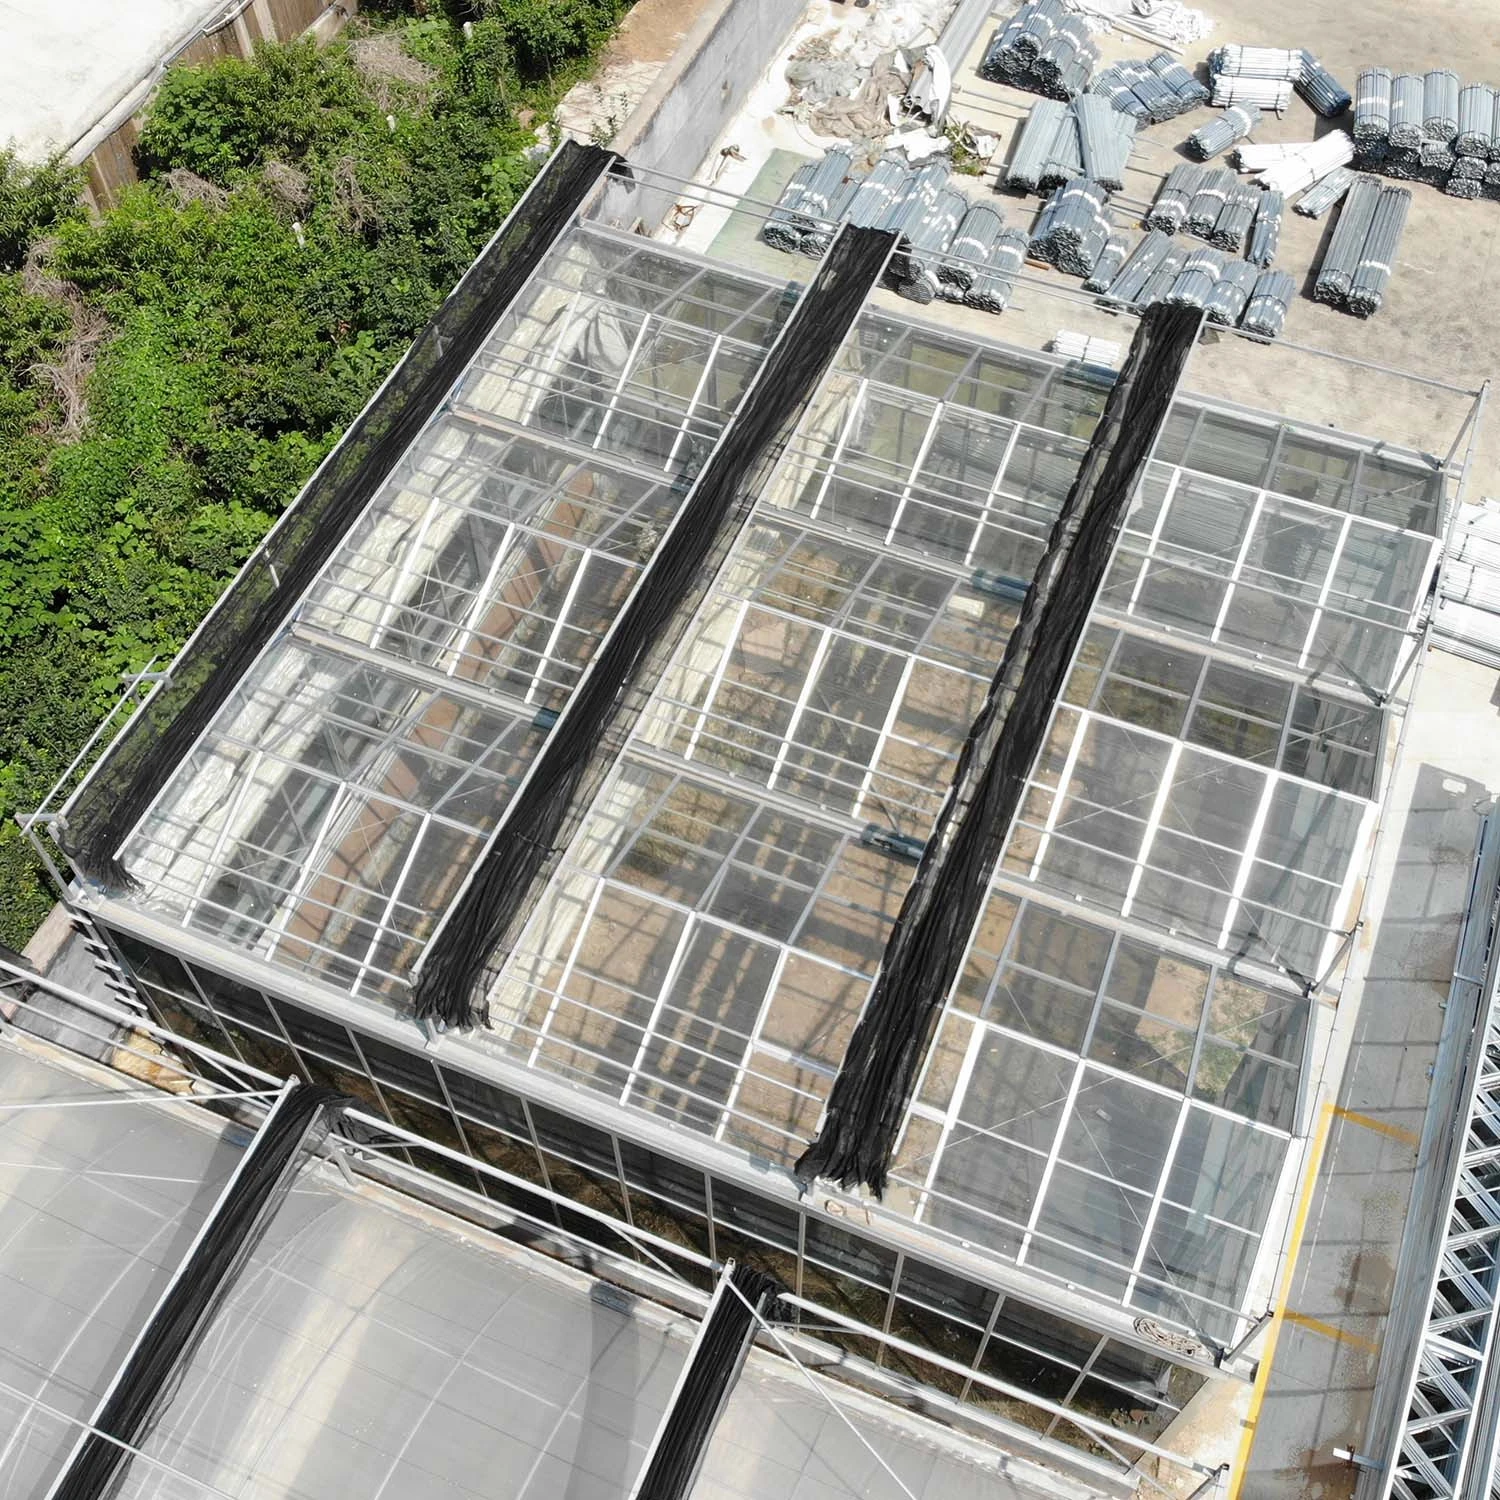 Factory Directly Provide co2 greenhouse retractable roof systems greenhouse flooring